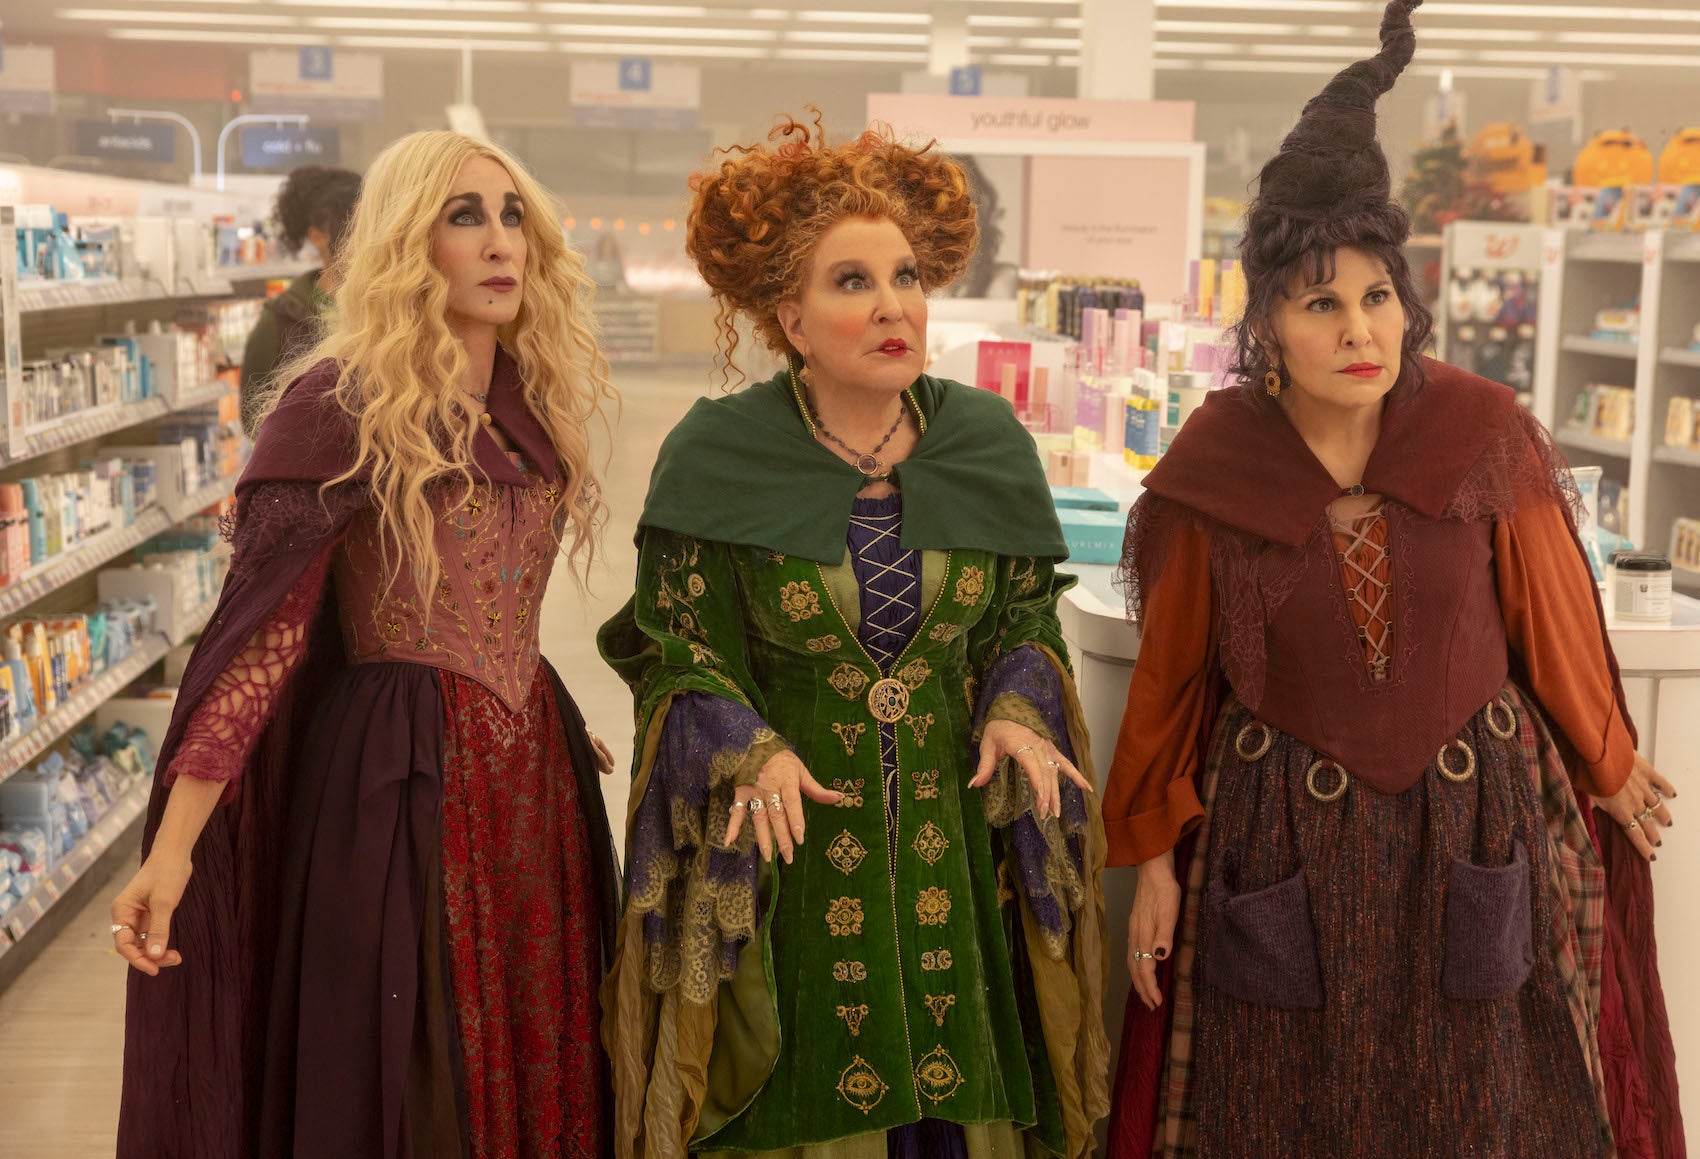 Kathy Najimy, Bette Midler, and Sarah Jessica Parker as the Sanderson sisters in "Hocus Pocus 2."